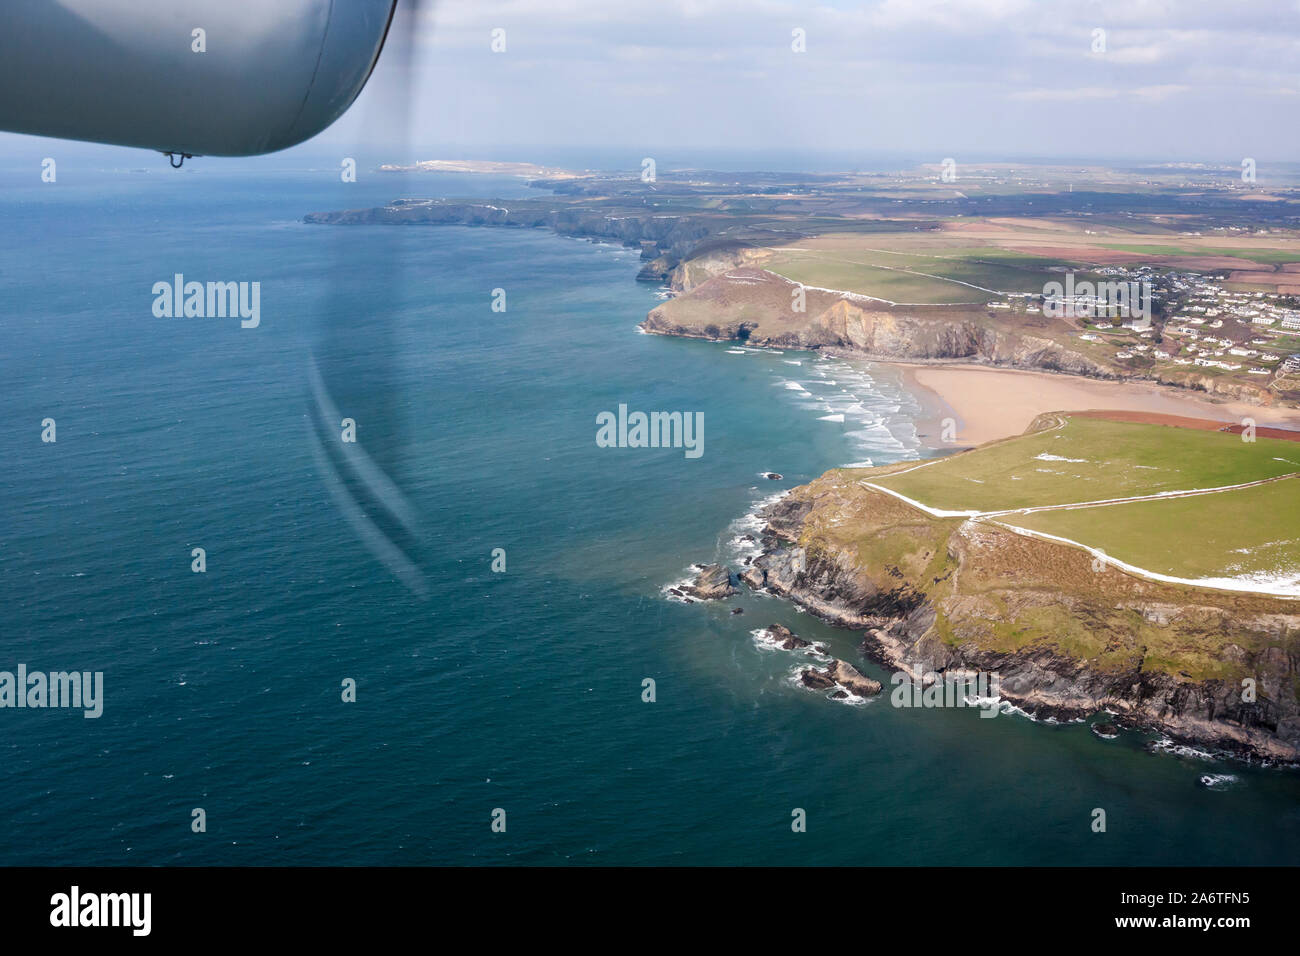 Coming in to land at Newquay Airport: Isles of Scilly to Newquay Skybus, DHC-6 Twin Otter: Cornwall, UK Stock Photo